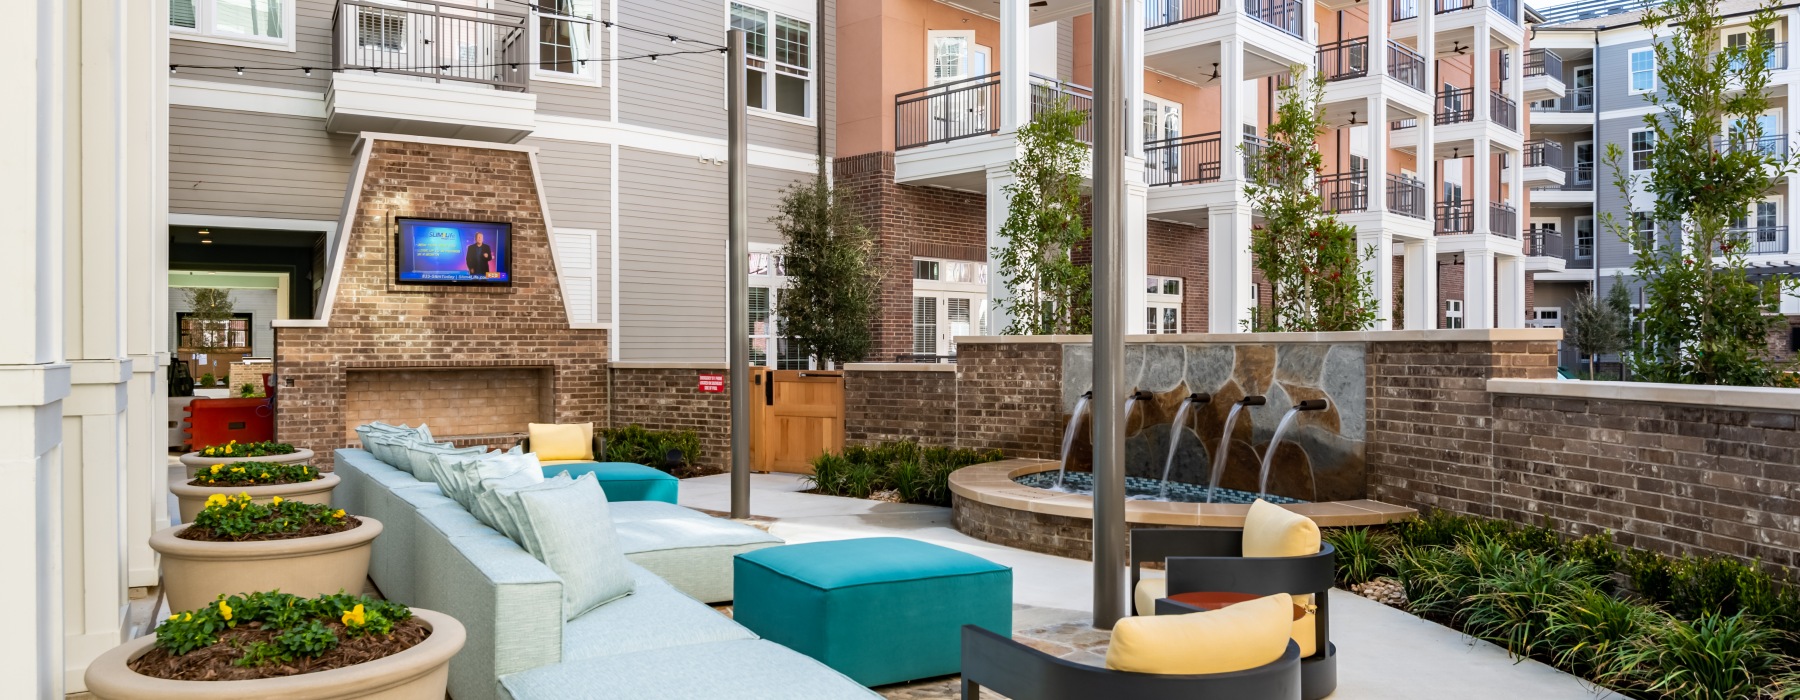 Beautiful outdoor community space at The Margo townhomes in Frisco, TX